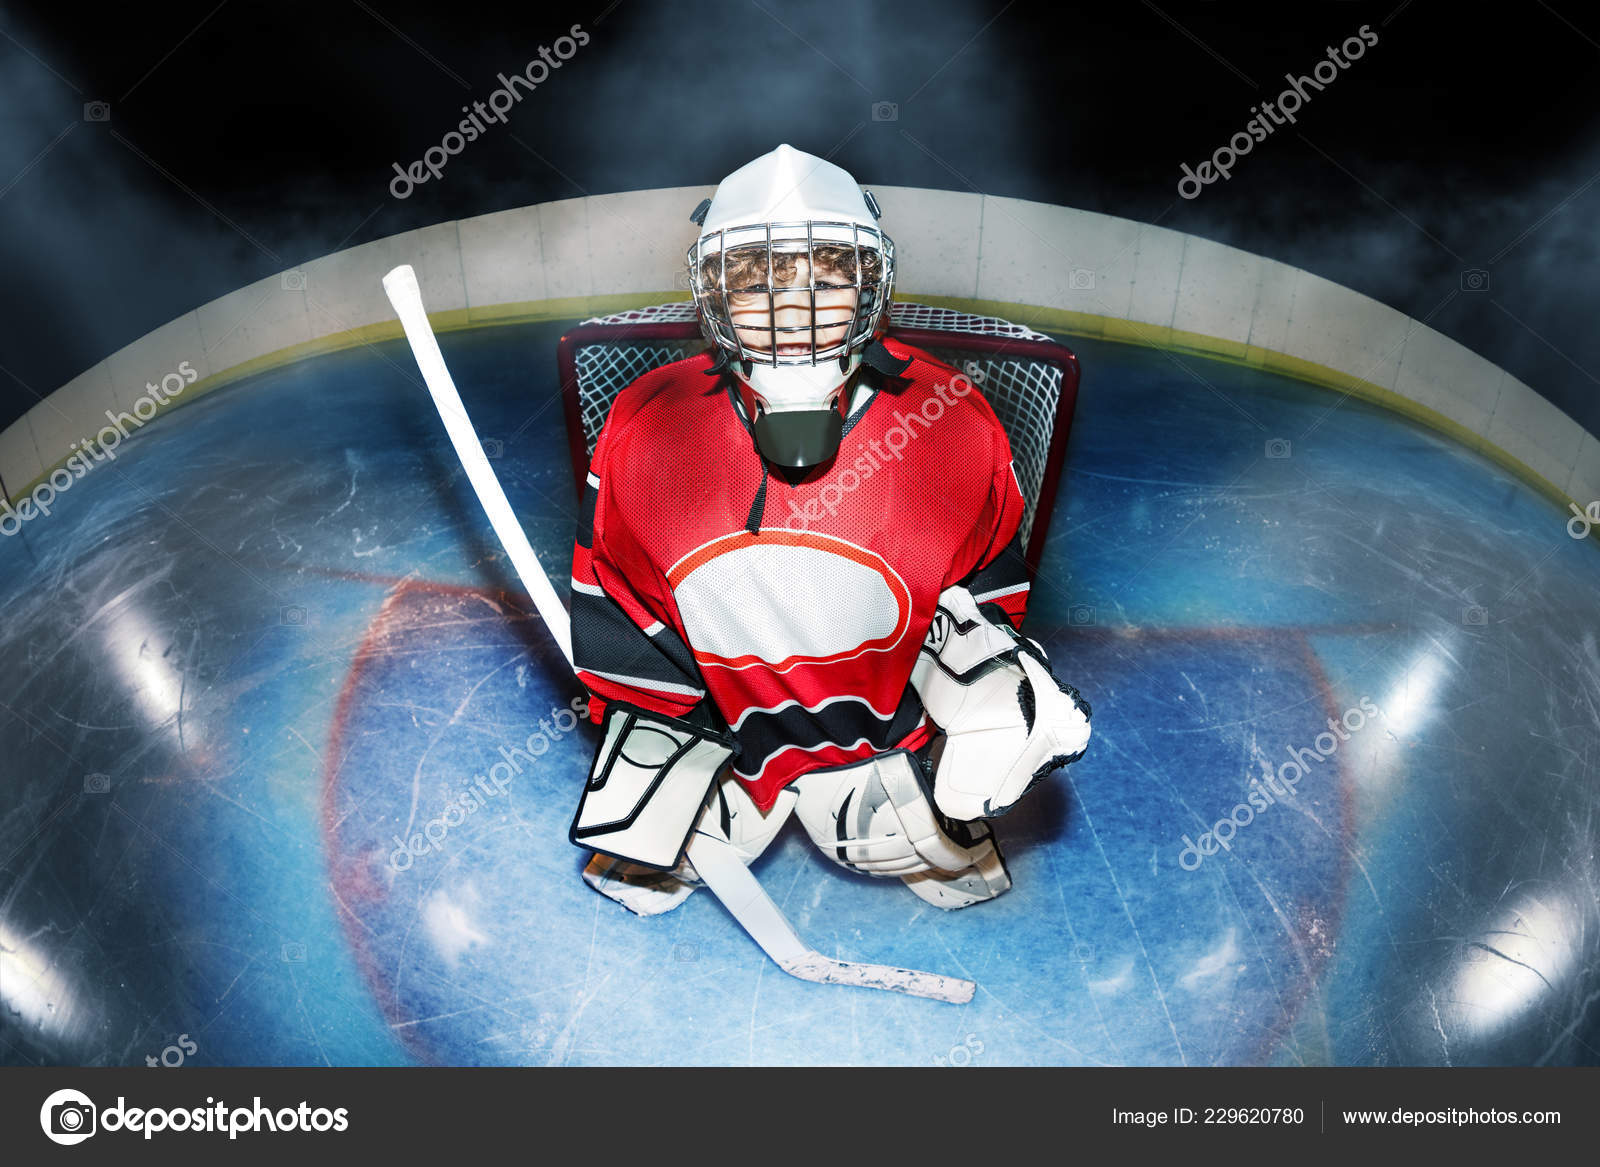 Boy Hockey Goalie Side View Stock Photo, Picture and Royalty Free